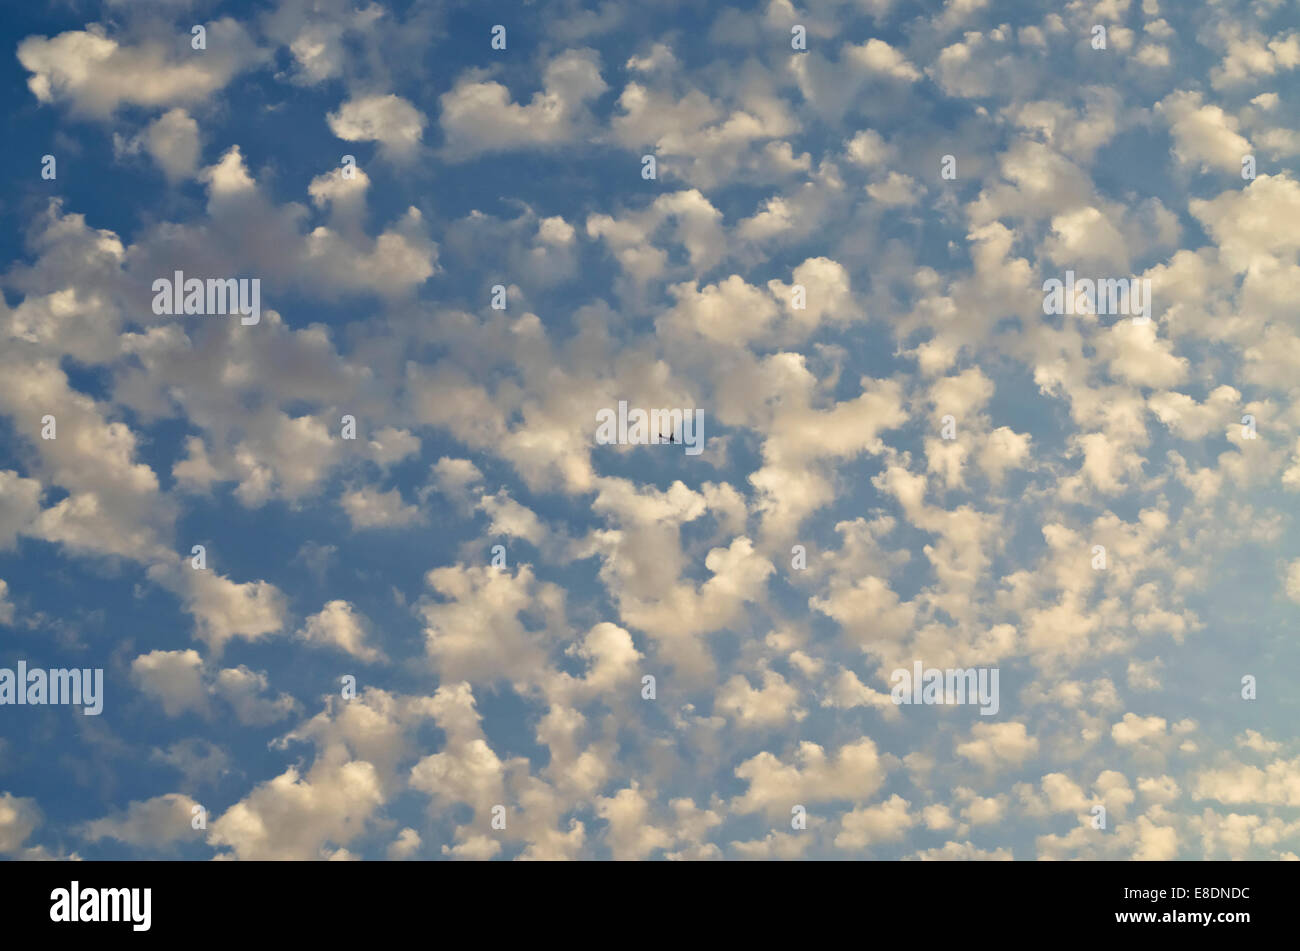 Blue sky filled with small puffy clouds at sunset, with tiny silhouette of commercial jet flying through. Stock Photo